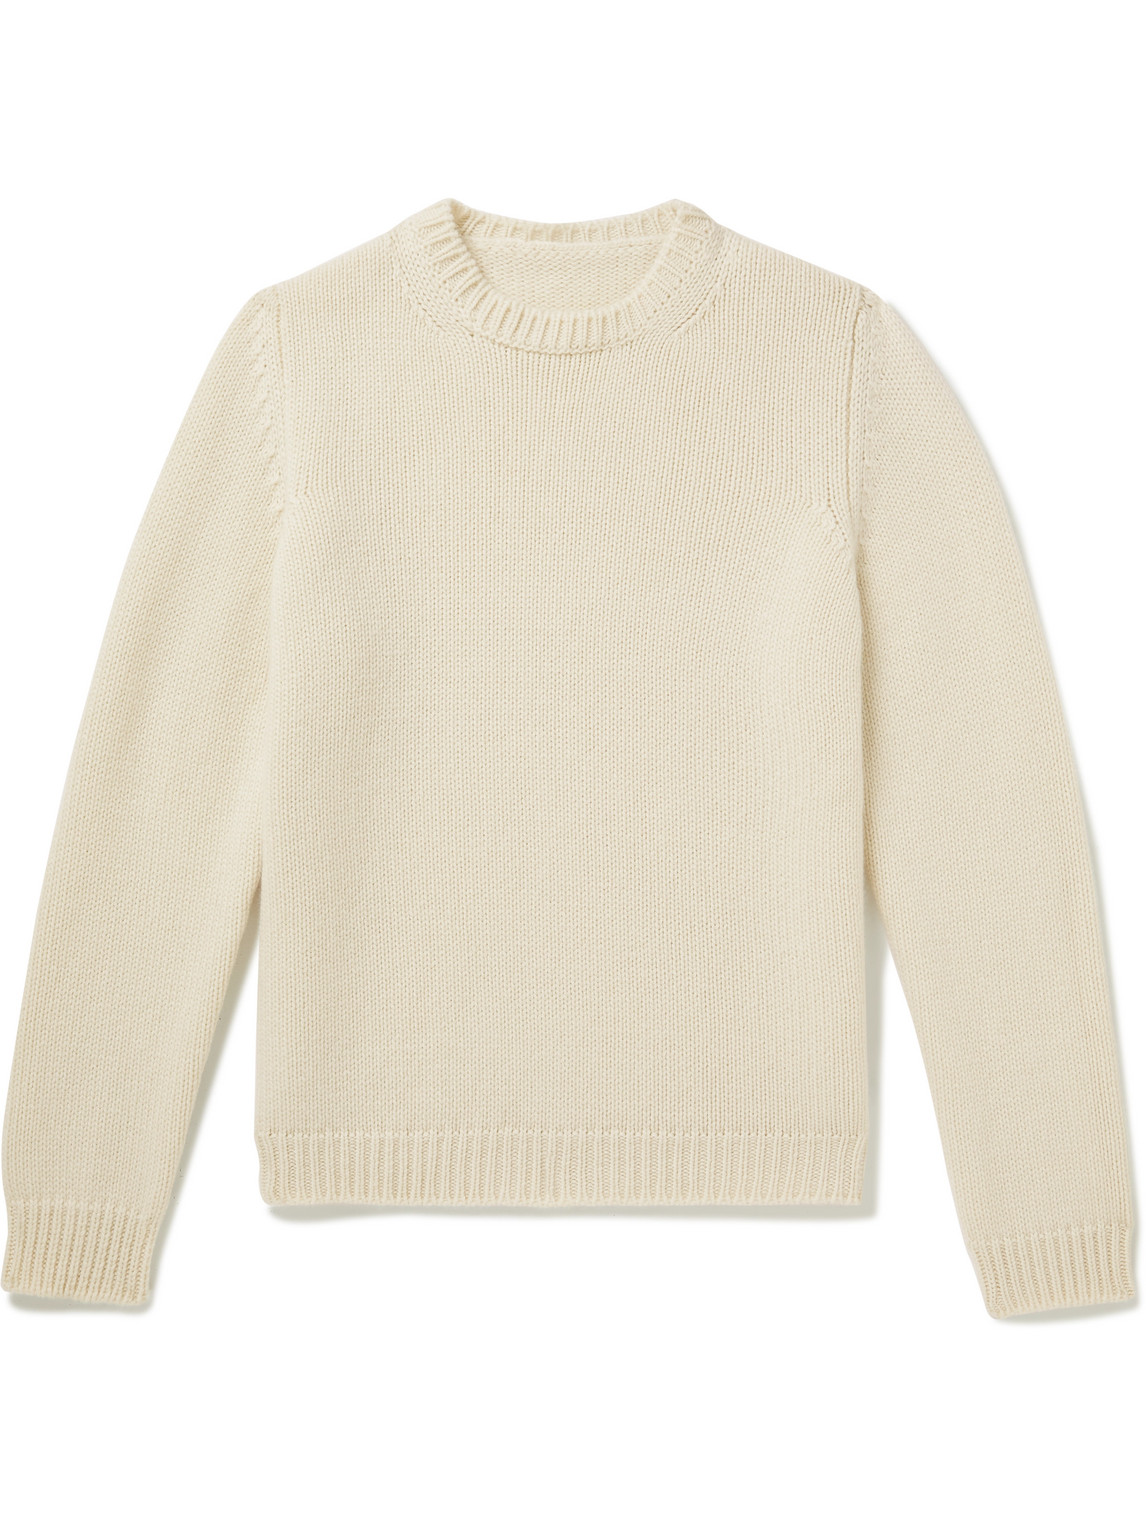 ANDERSON & SHEPPARD CASHMERE SWEATER